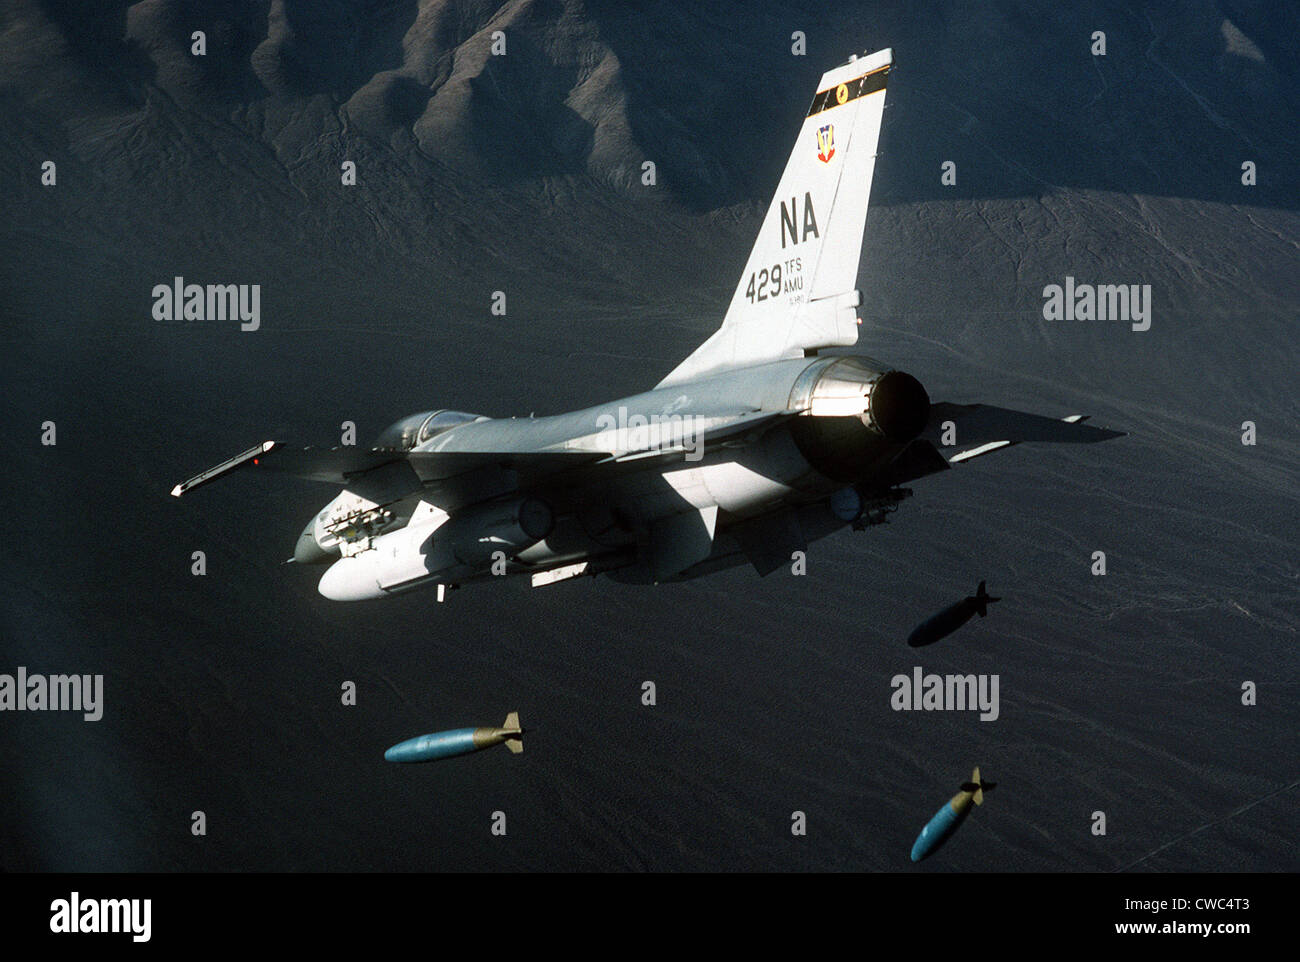 F-16 Fighter releasing three 2000-pound bombs. Feb 1 1987. (BSLOC 2011 12 220) Stock Photo